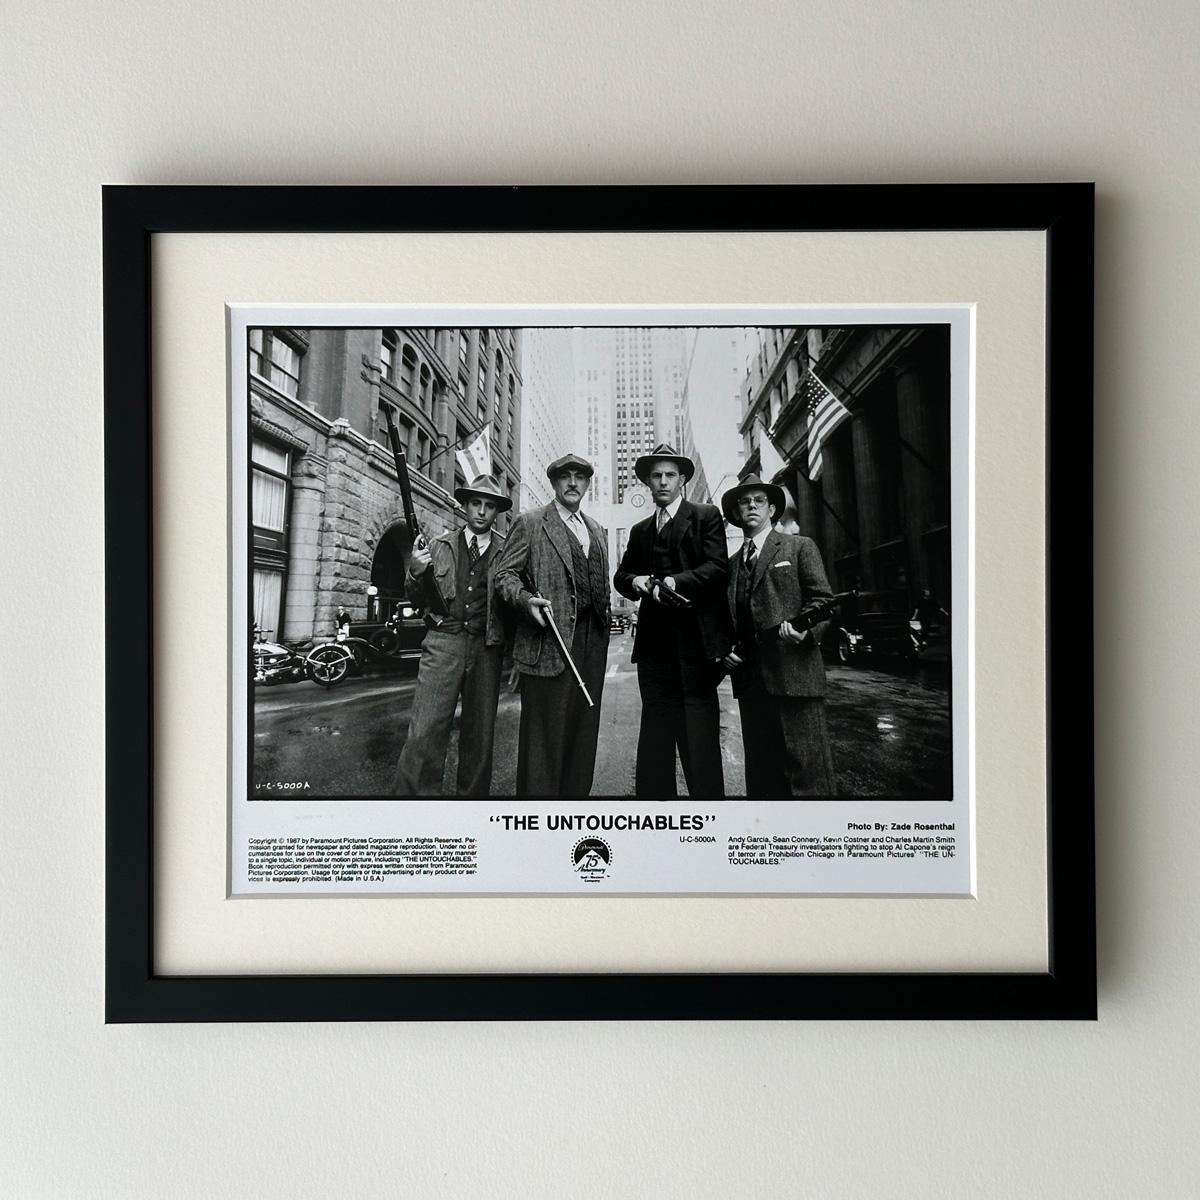 Original Paramount Picture 8x10 inches Publicity Still for Brian De Palma classic 80s gangster flick The Untouchables featuring an iconic image of Andy Garcia, Sean Connery, Keven Costner and Charles Martin Smith.

Publicity (film/production) stills